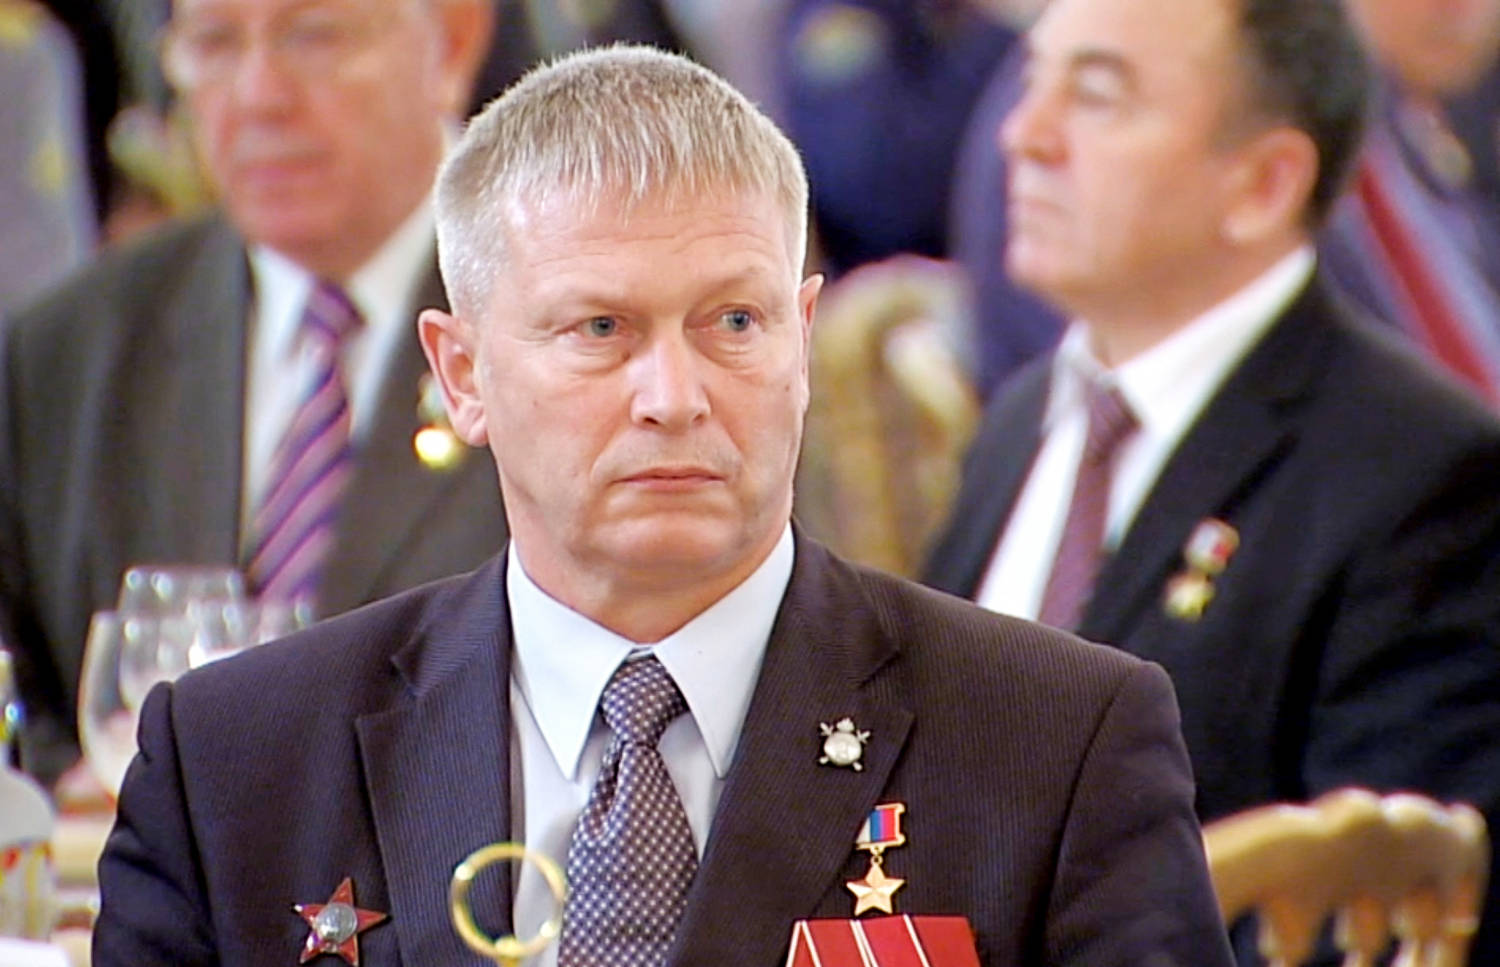 Wagner fighters may be back in Ukraine as Putin meets with top commander from mercenary group